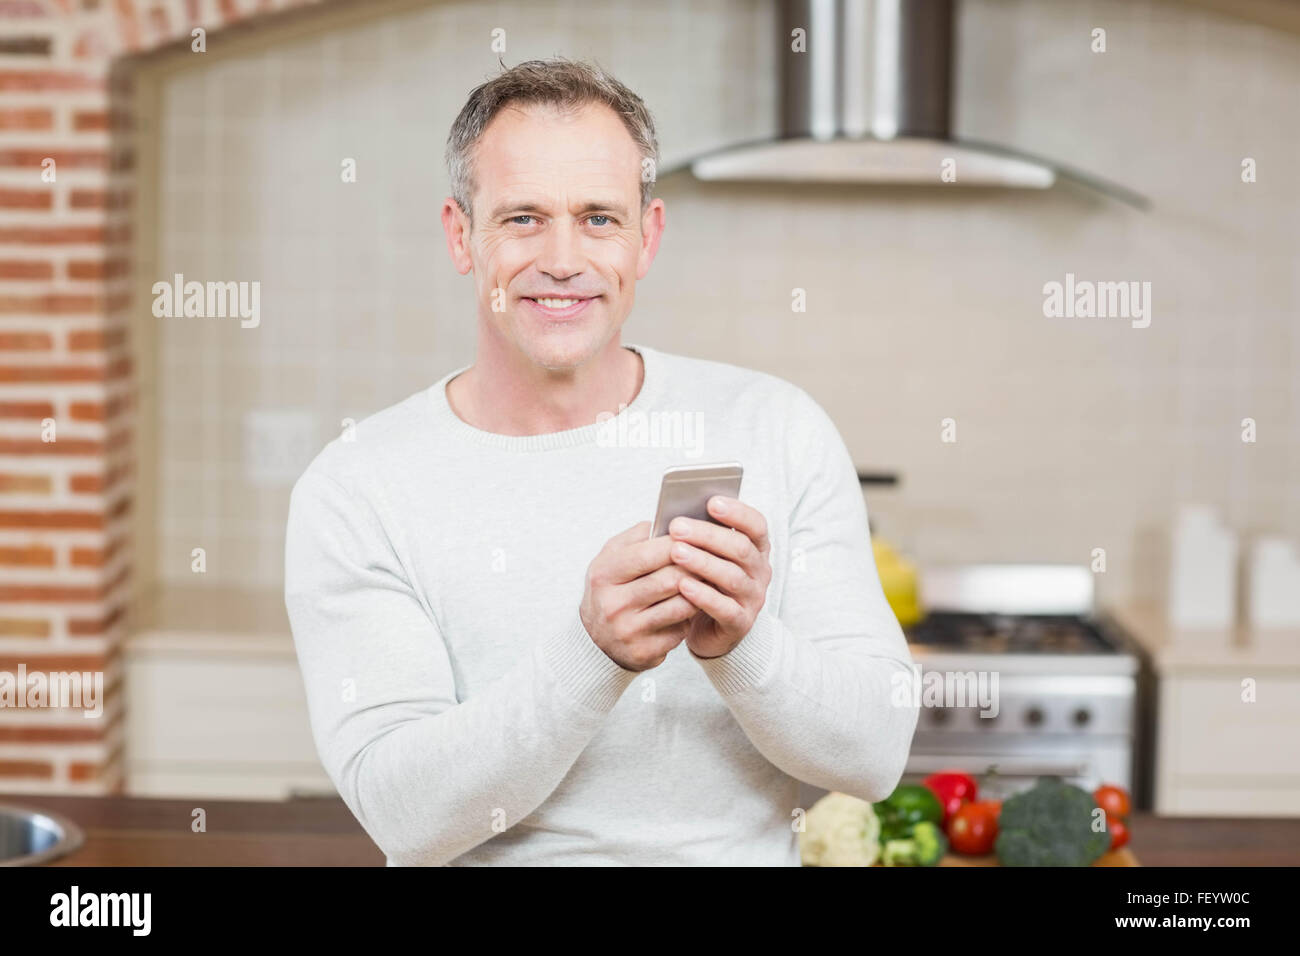 Handsome man looking at smartphone Stock Photo